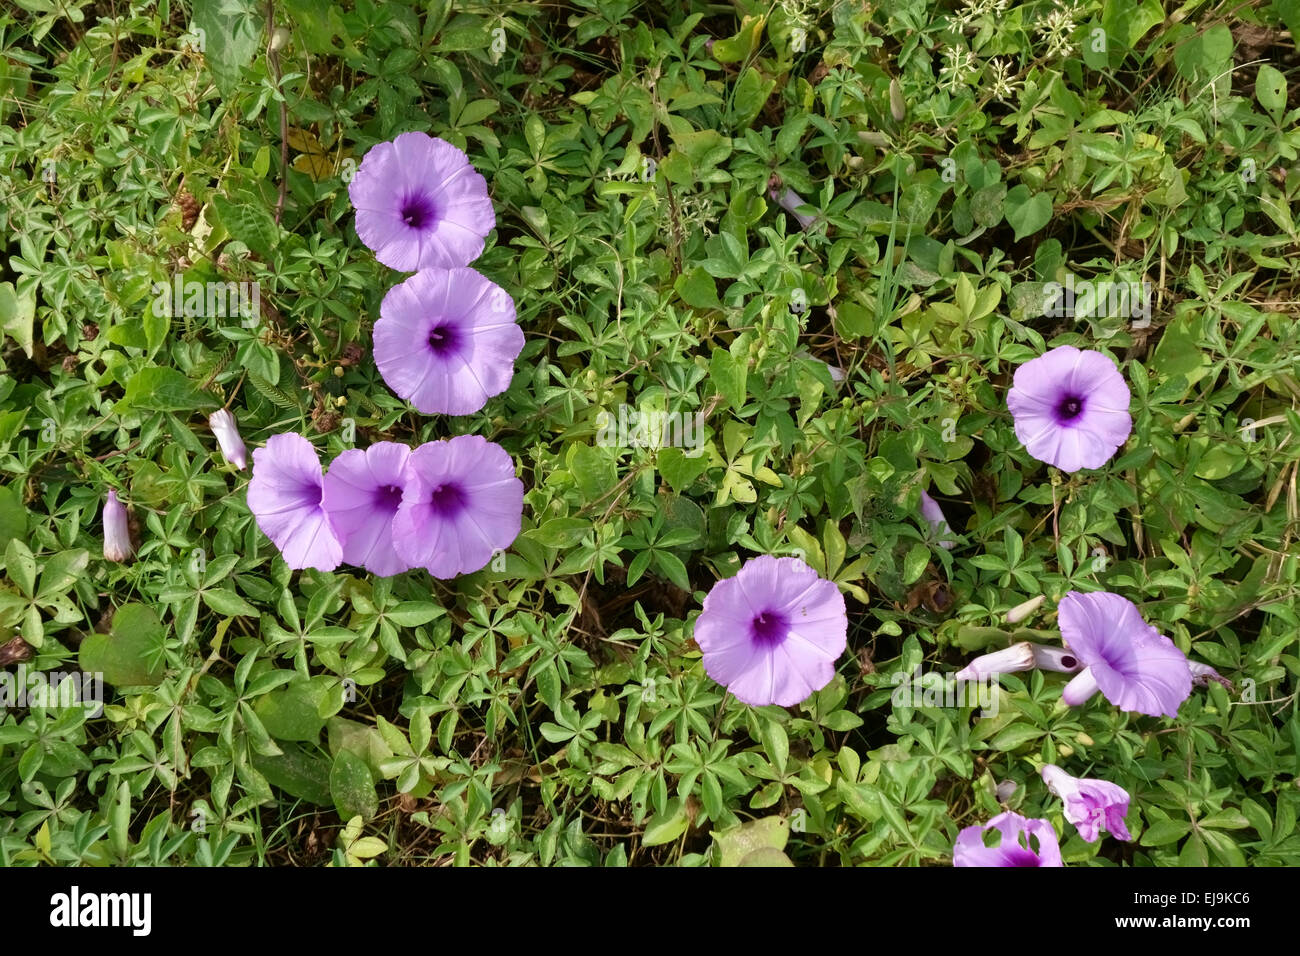 Flowers of beach morning glory, Ipomoea pes-caprae, flowers among other creeping plants on a beach in Thailand, March Stock Photo